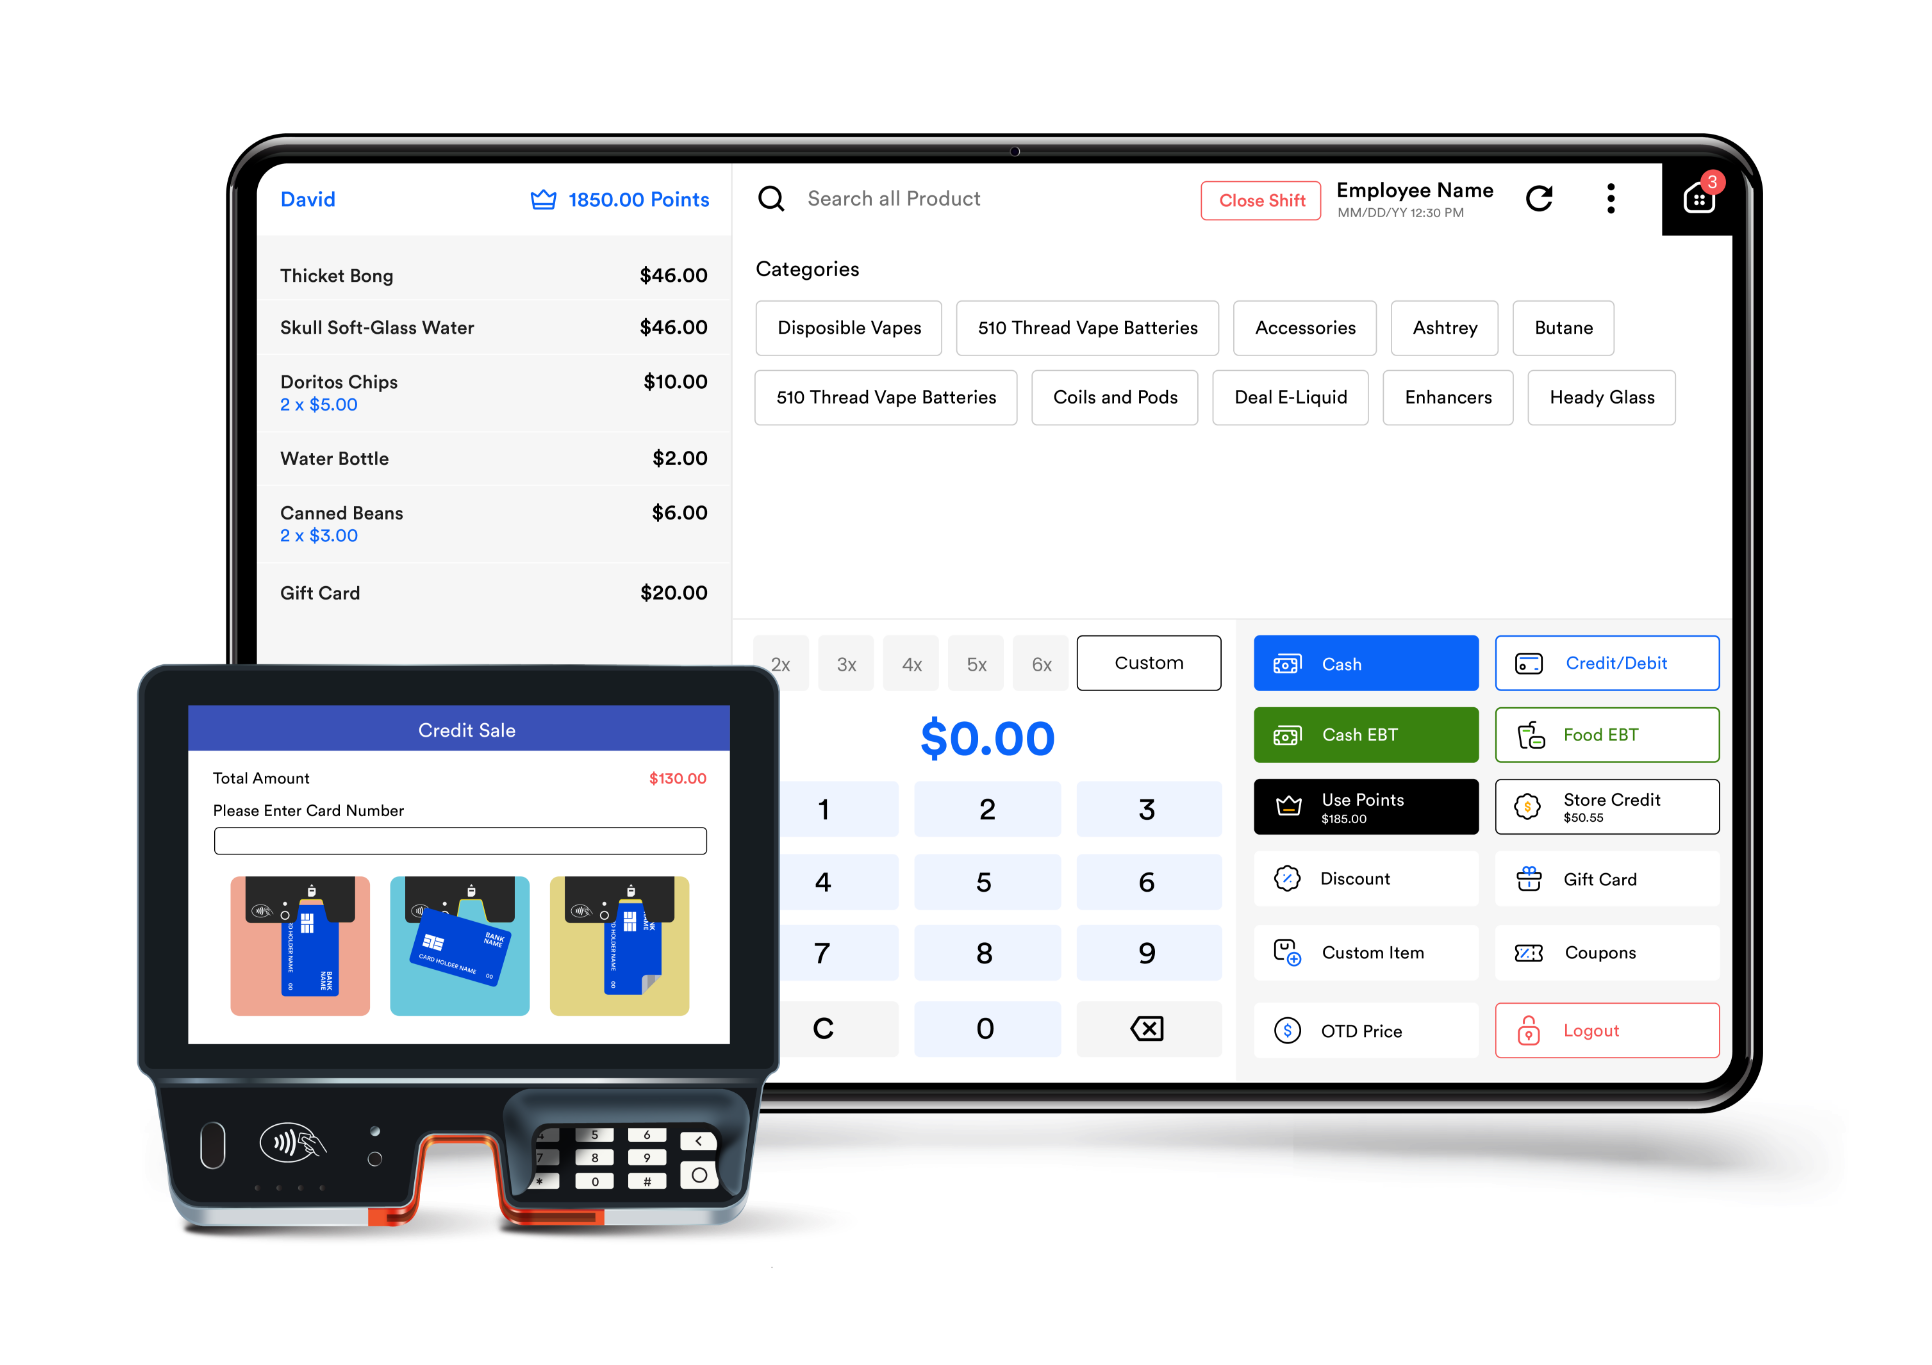 Quickvee POS: Tailor Your System to Fit Your Business